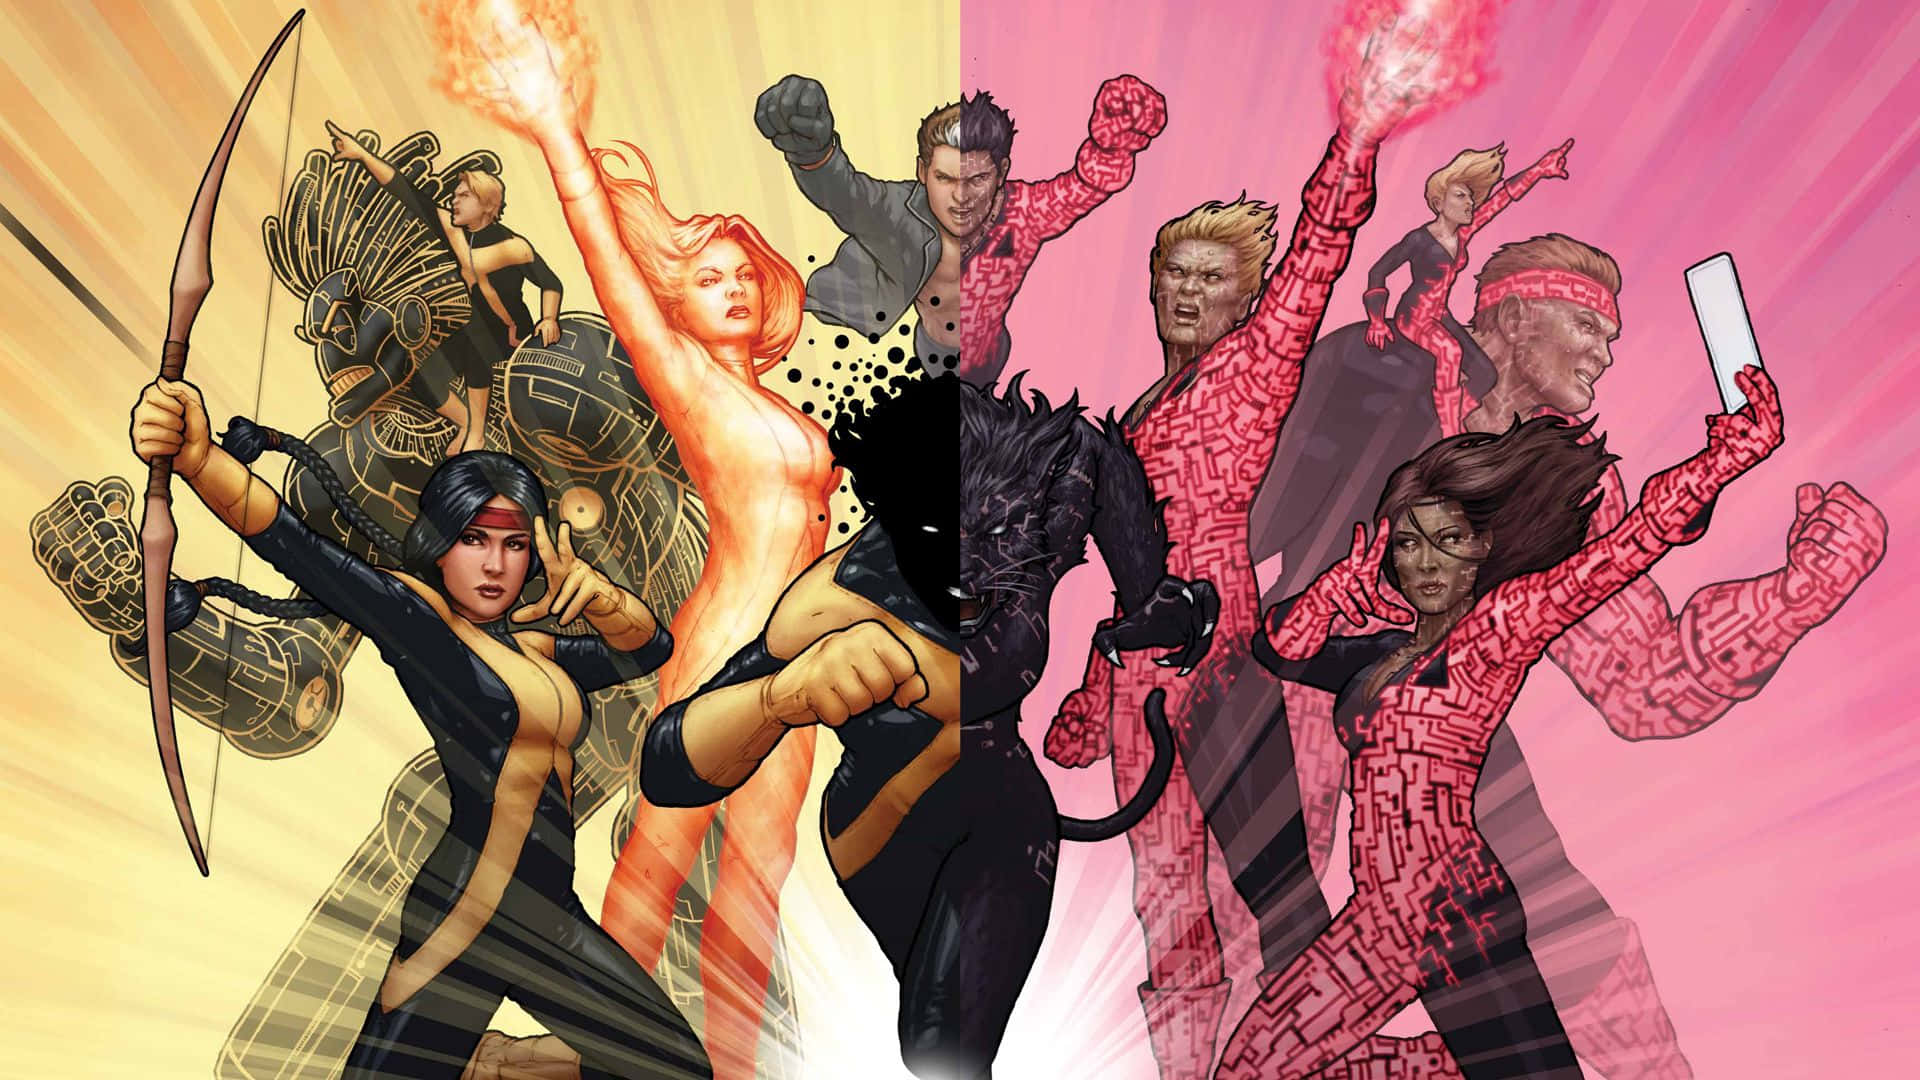 The New Mutants group standing together in action Wallpaper